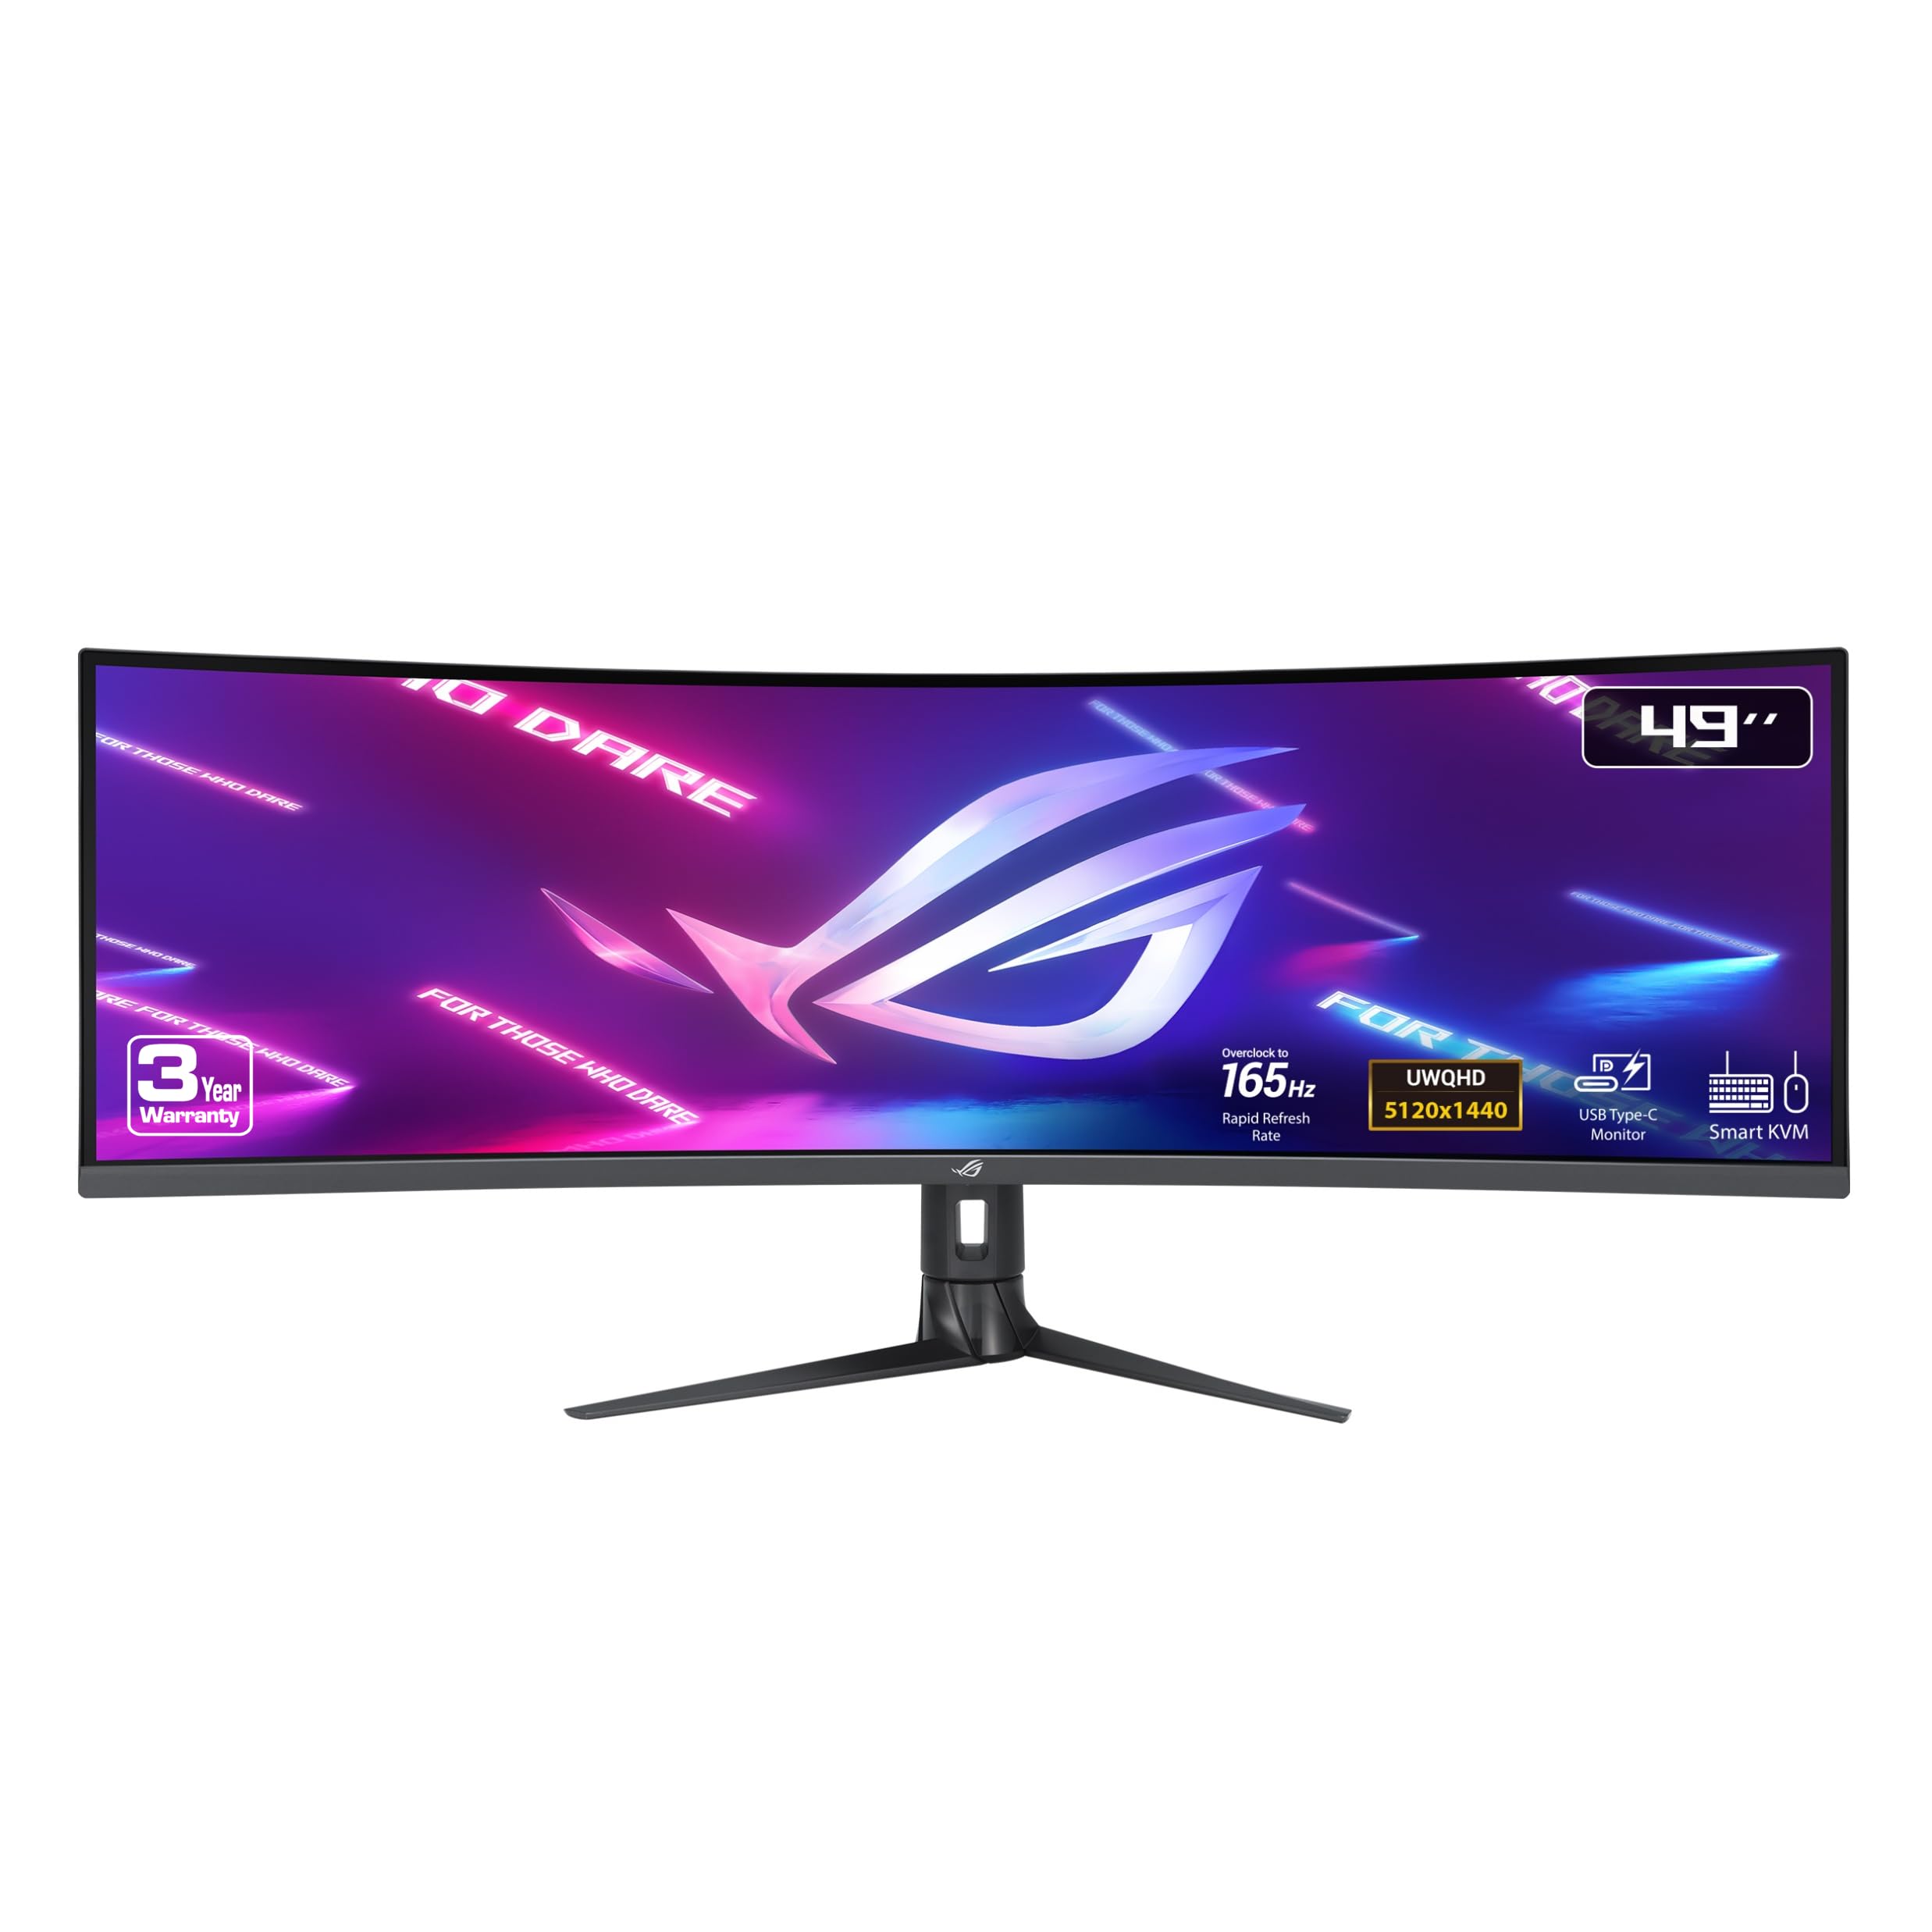 49" ASUS ROG Strix Ultra-Wide Curved Dual QHD Gaming Monitor $700 + Free Shipping